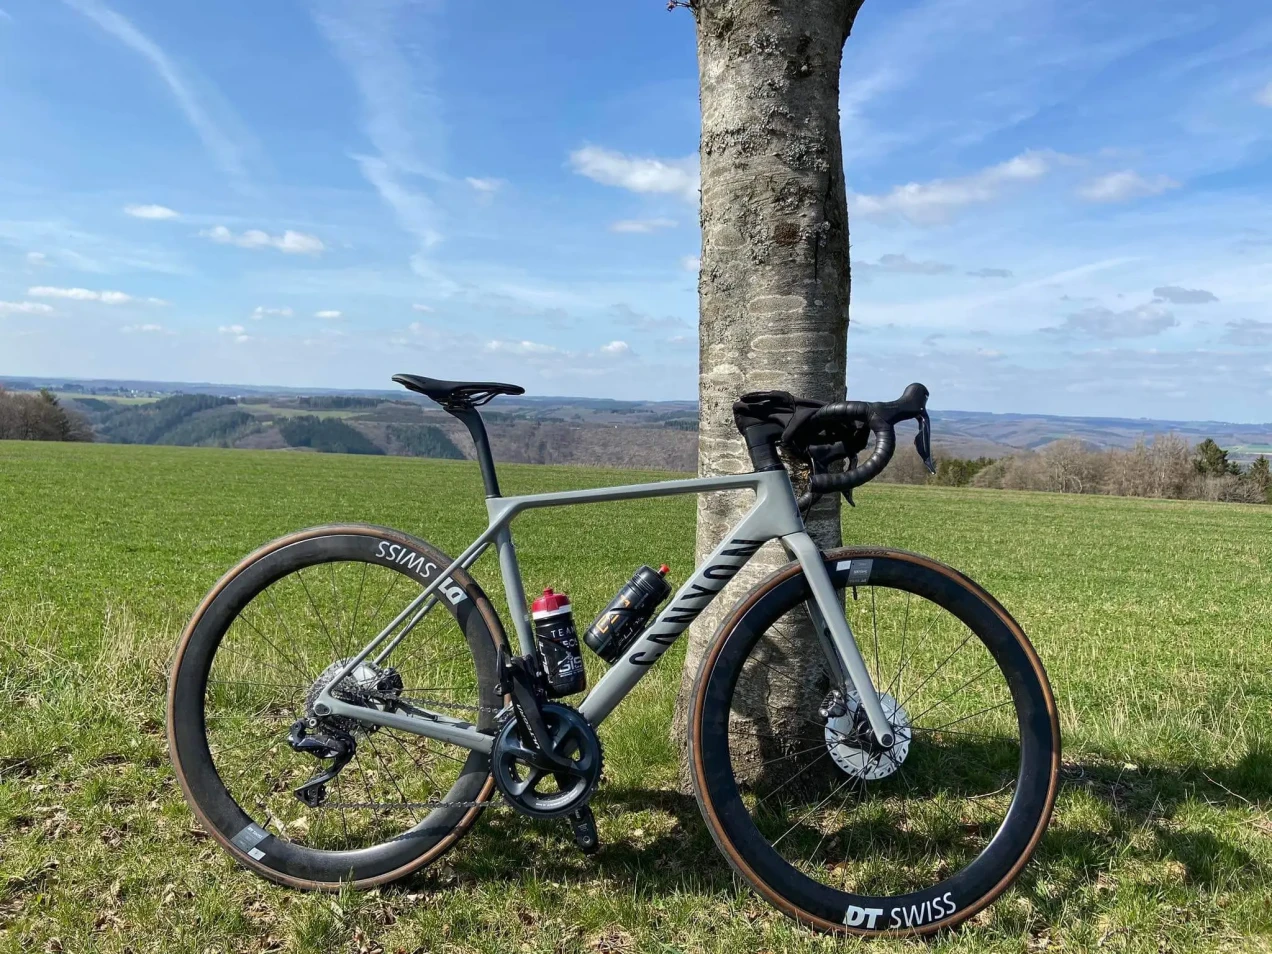 Canyon Ultimate CF SL 8 Disc Aero used in SM | buycycle